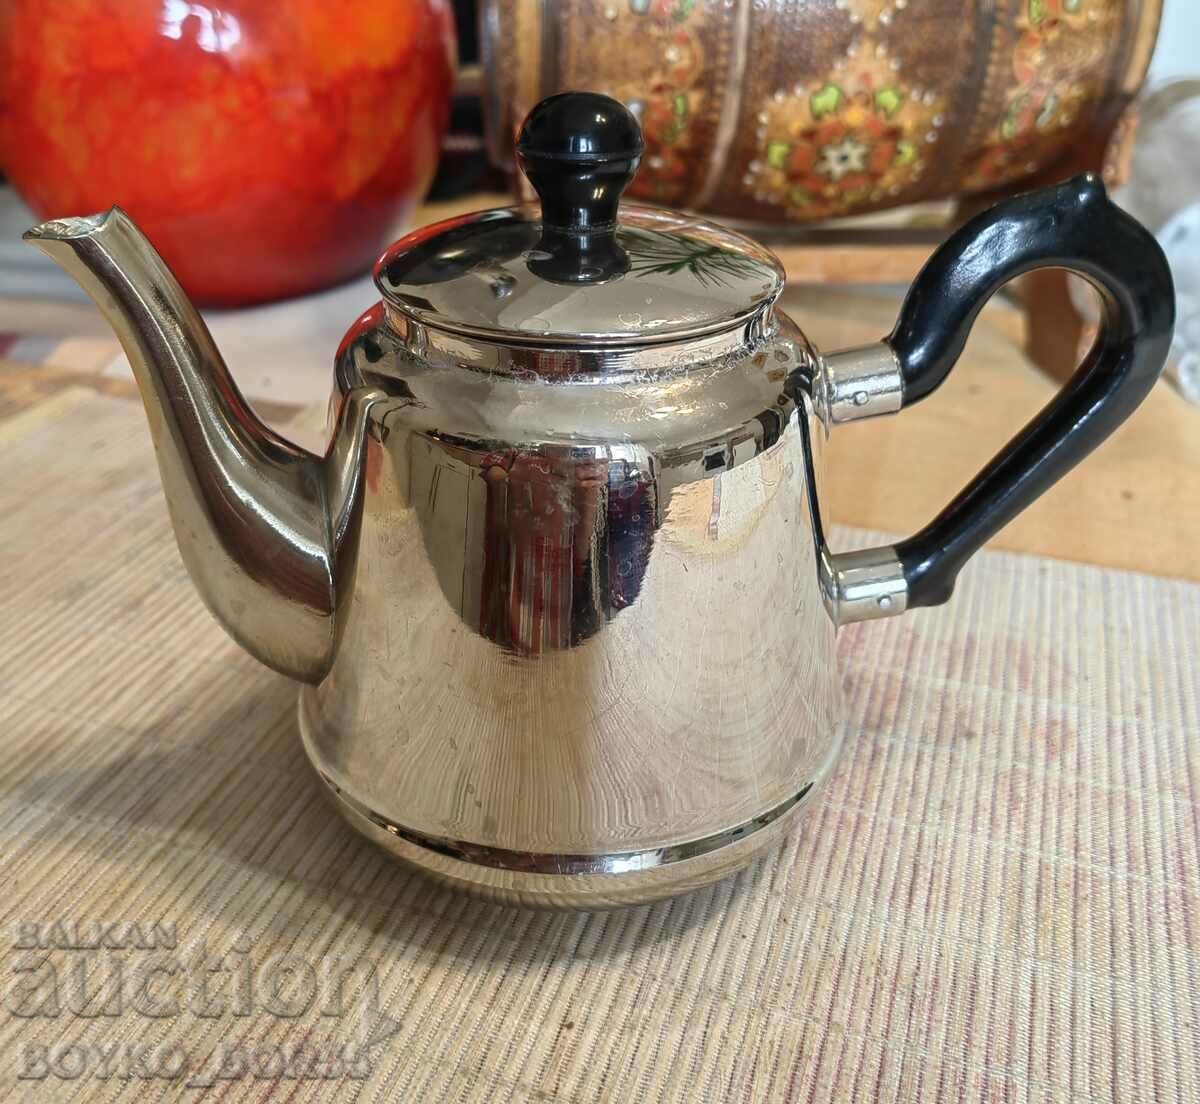 Russian Social USSR Teapot from the 1980s 1/2 liter